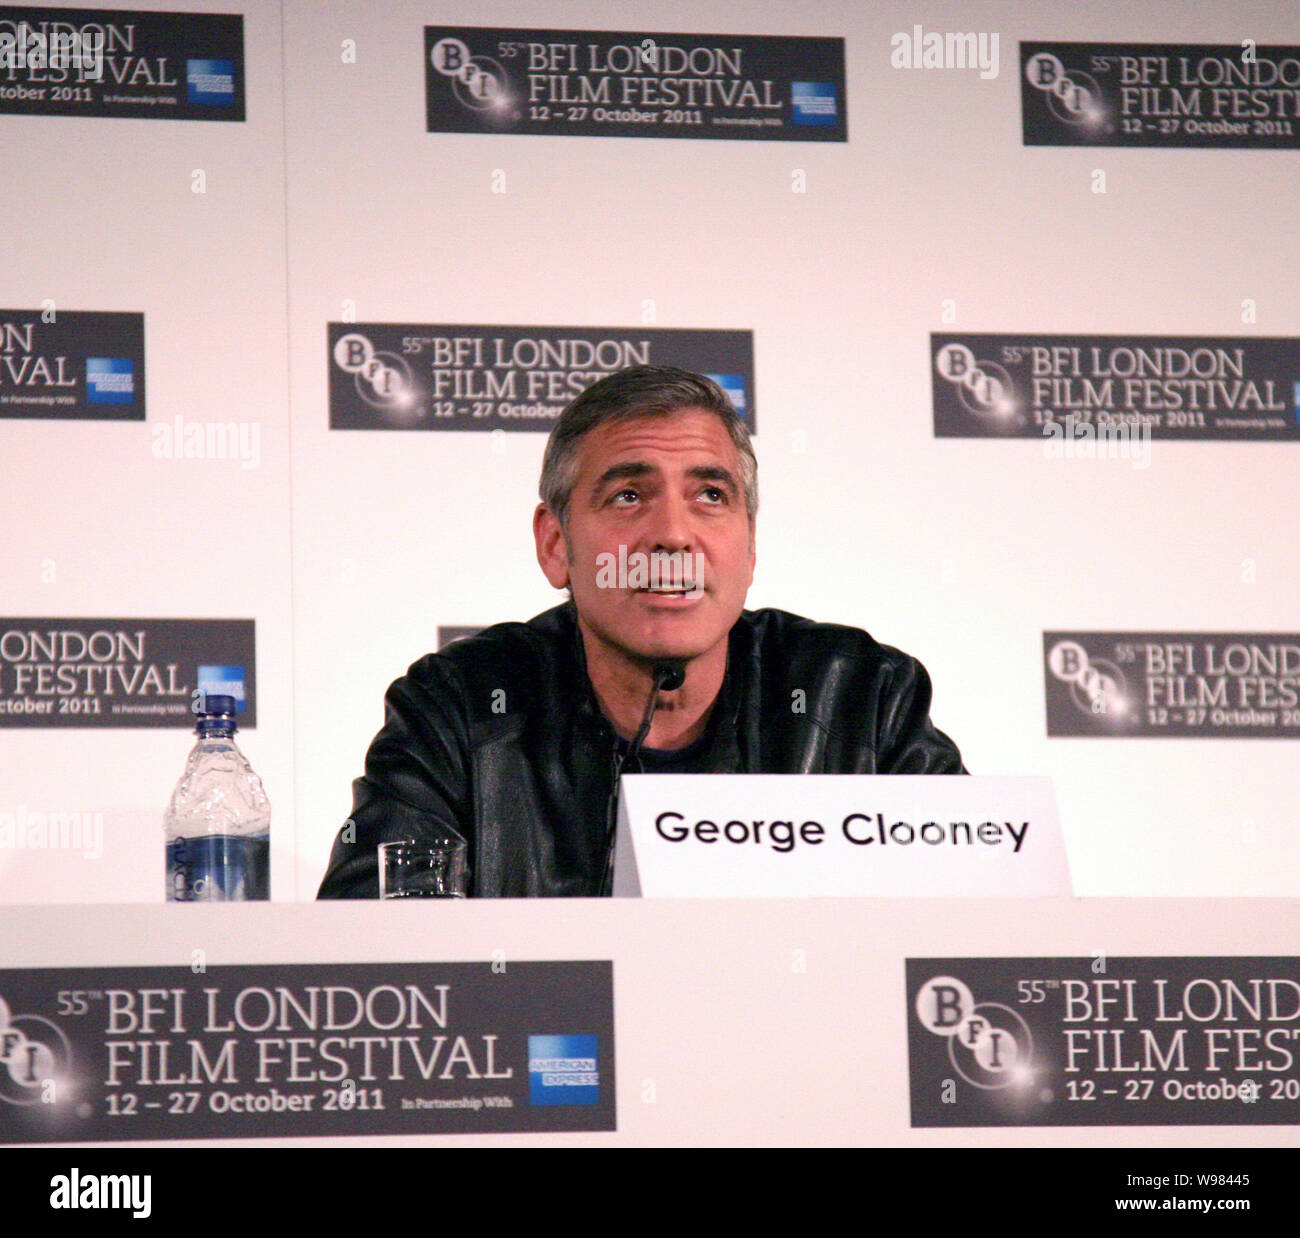 US actor George Clooney speaks at a press conference for the movie, The Ides of March, during the 55th BFI London Film Festival in London, UK, 19 Octo Stock Photo